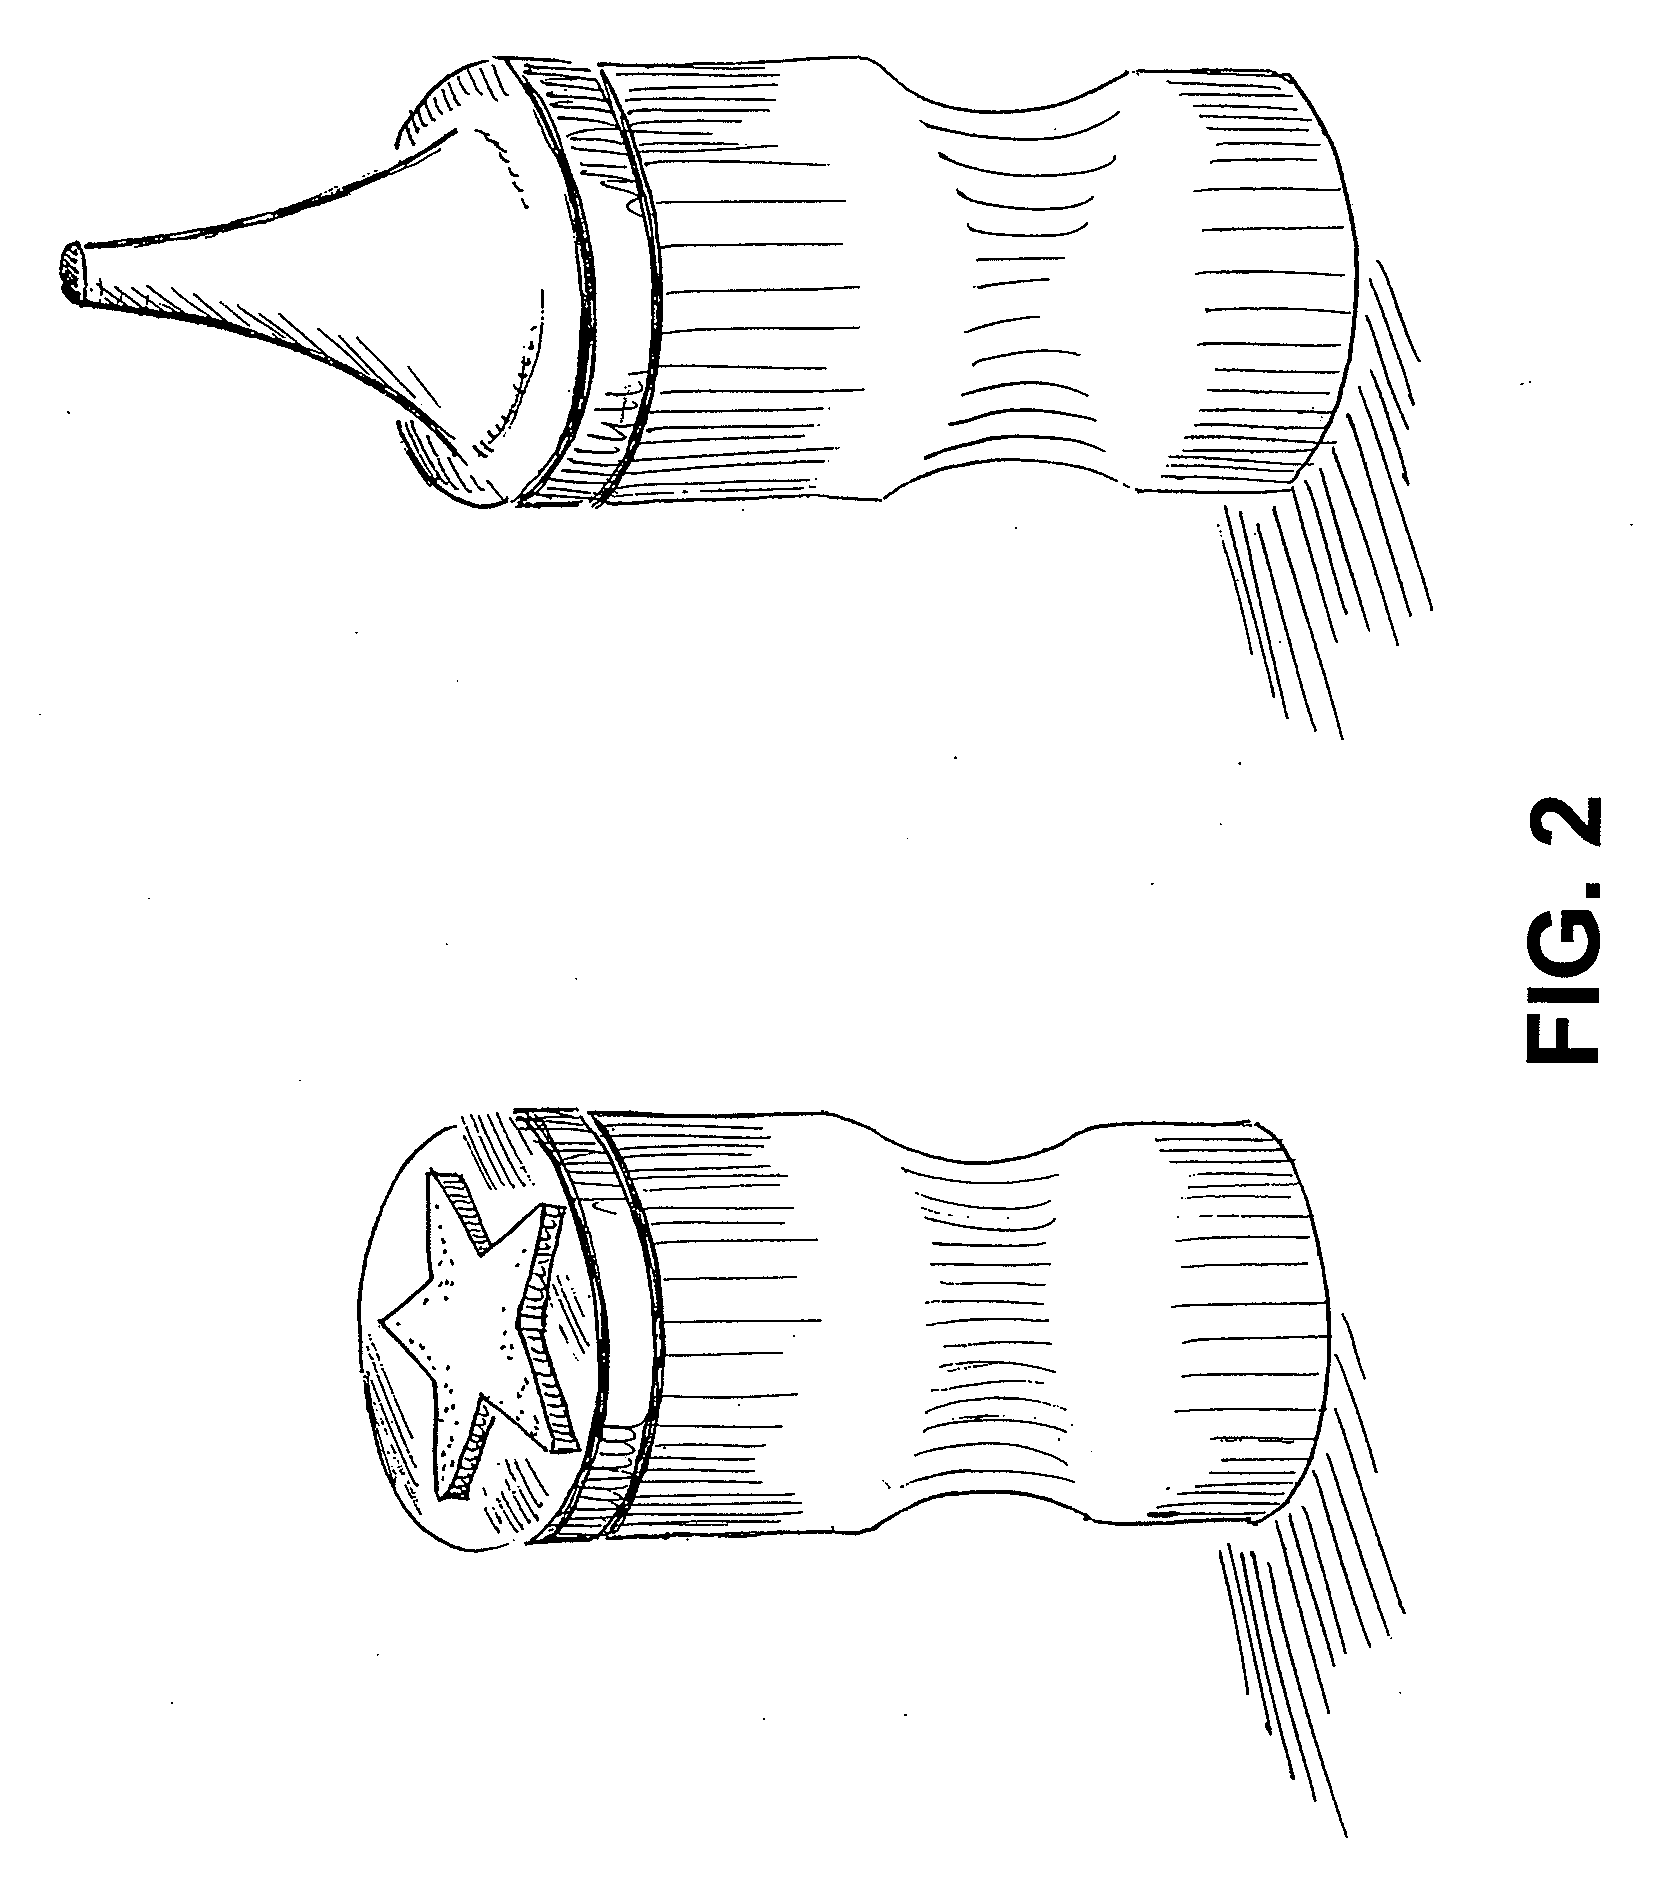 Foodware Decorating System and Method